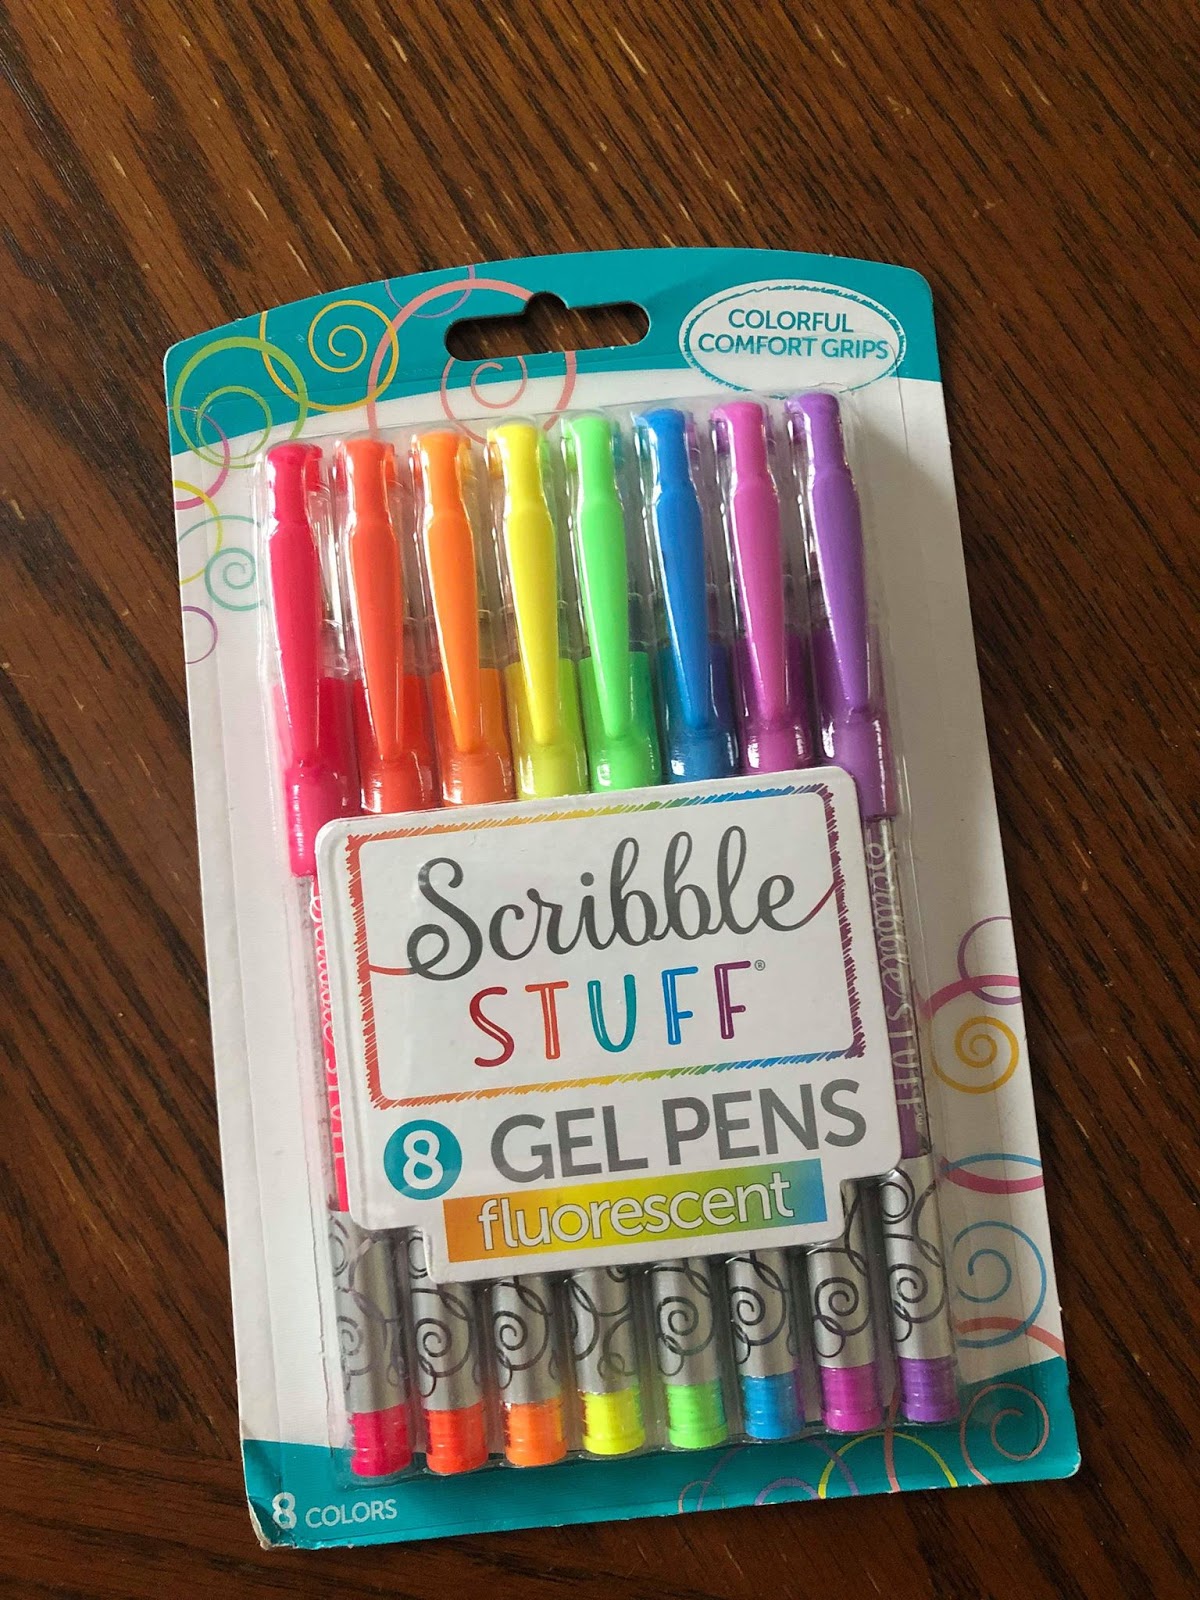 Gear Up For The School Year With Scribble Stuff and USA Gold